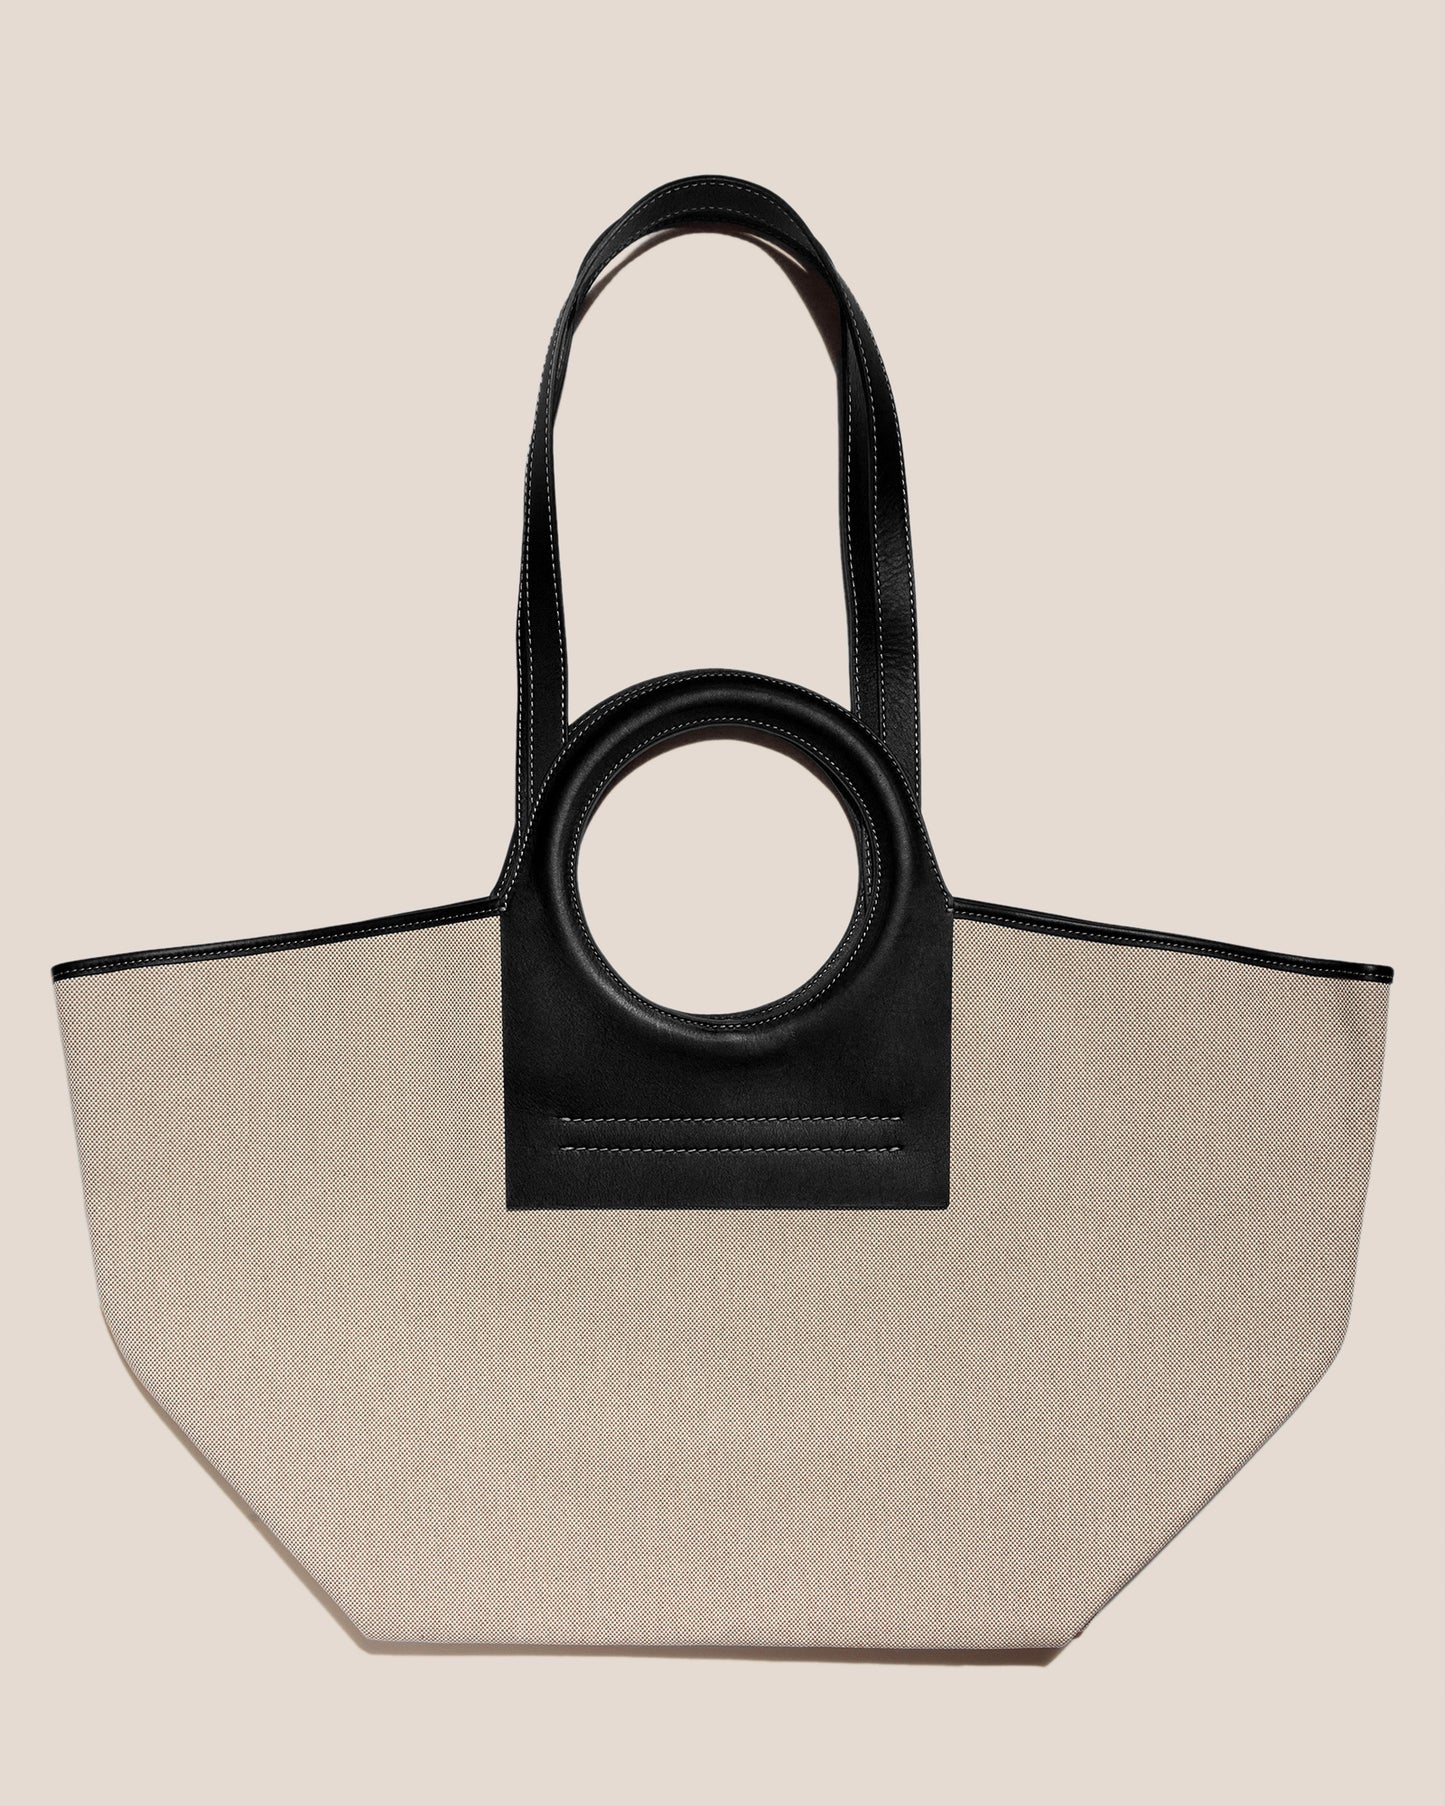 Cra-wallonieShops, Orciani logo-plaque leather tote bag